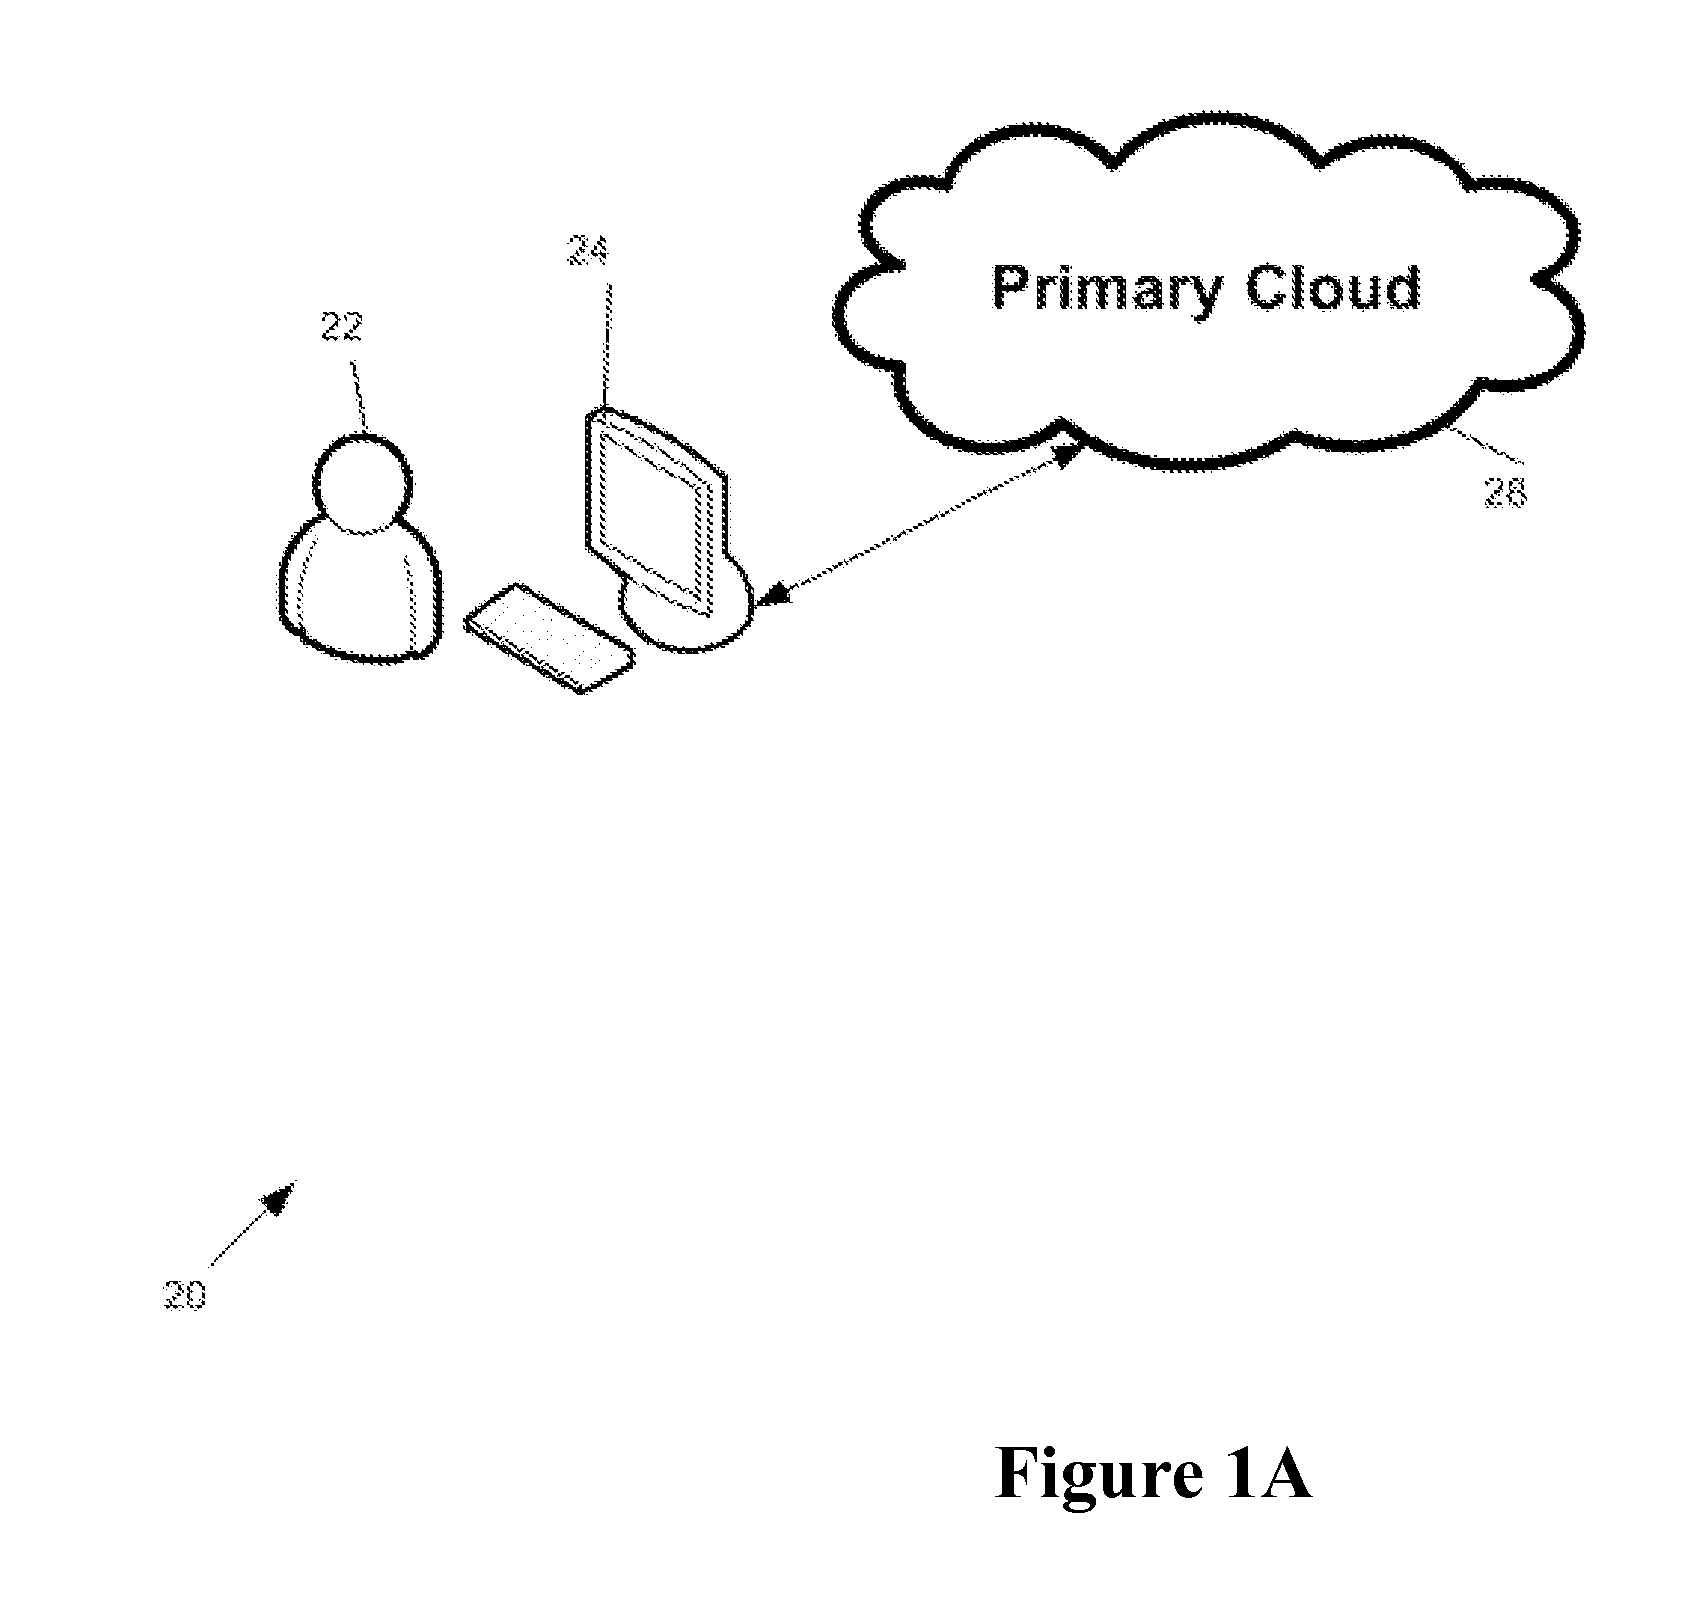 System and method for developing, deploying, managing and monitoring a web application in a single environment